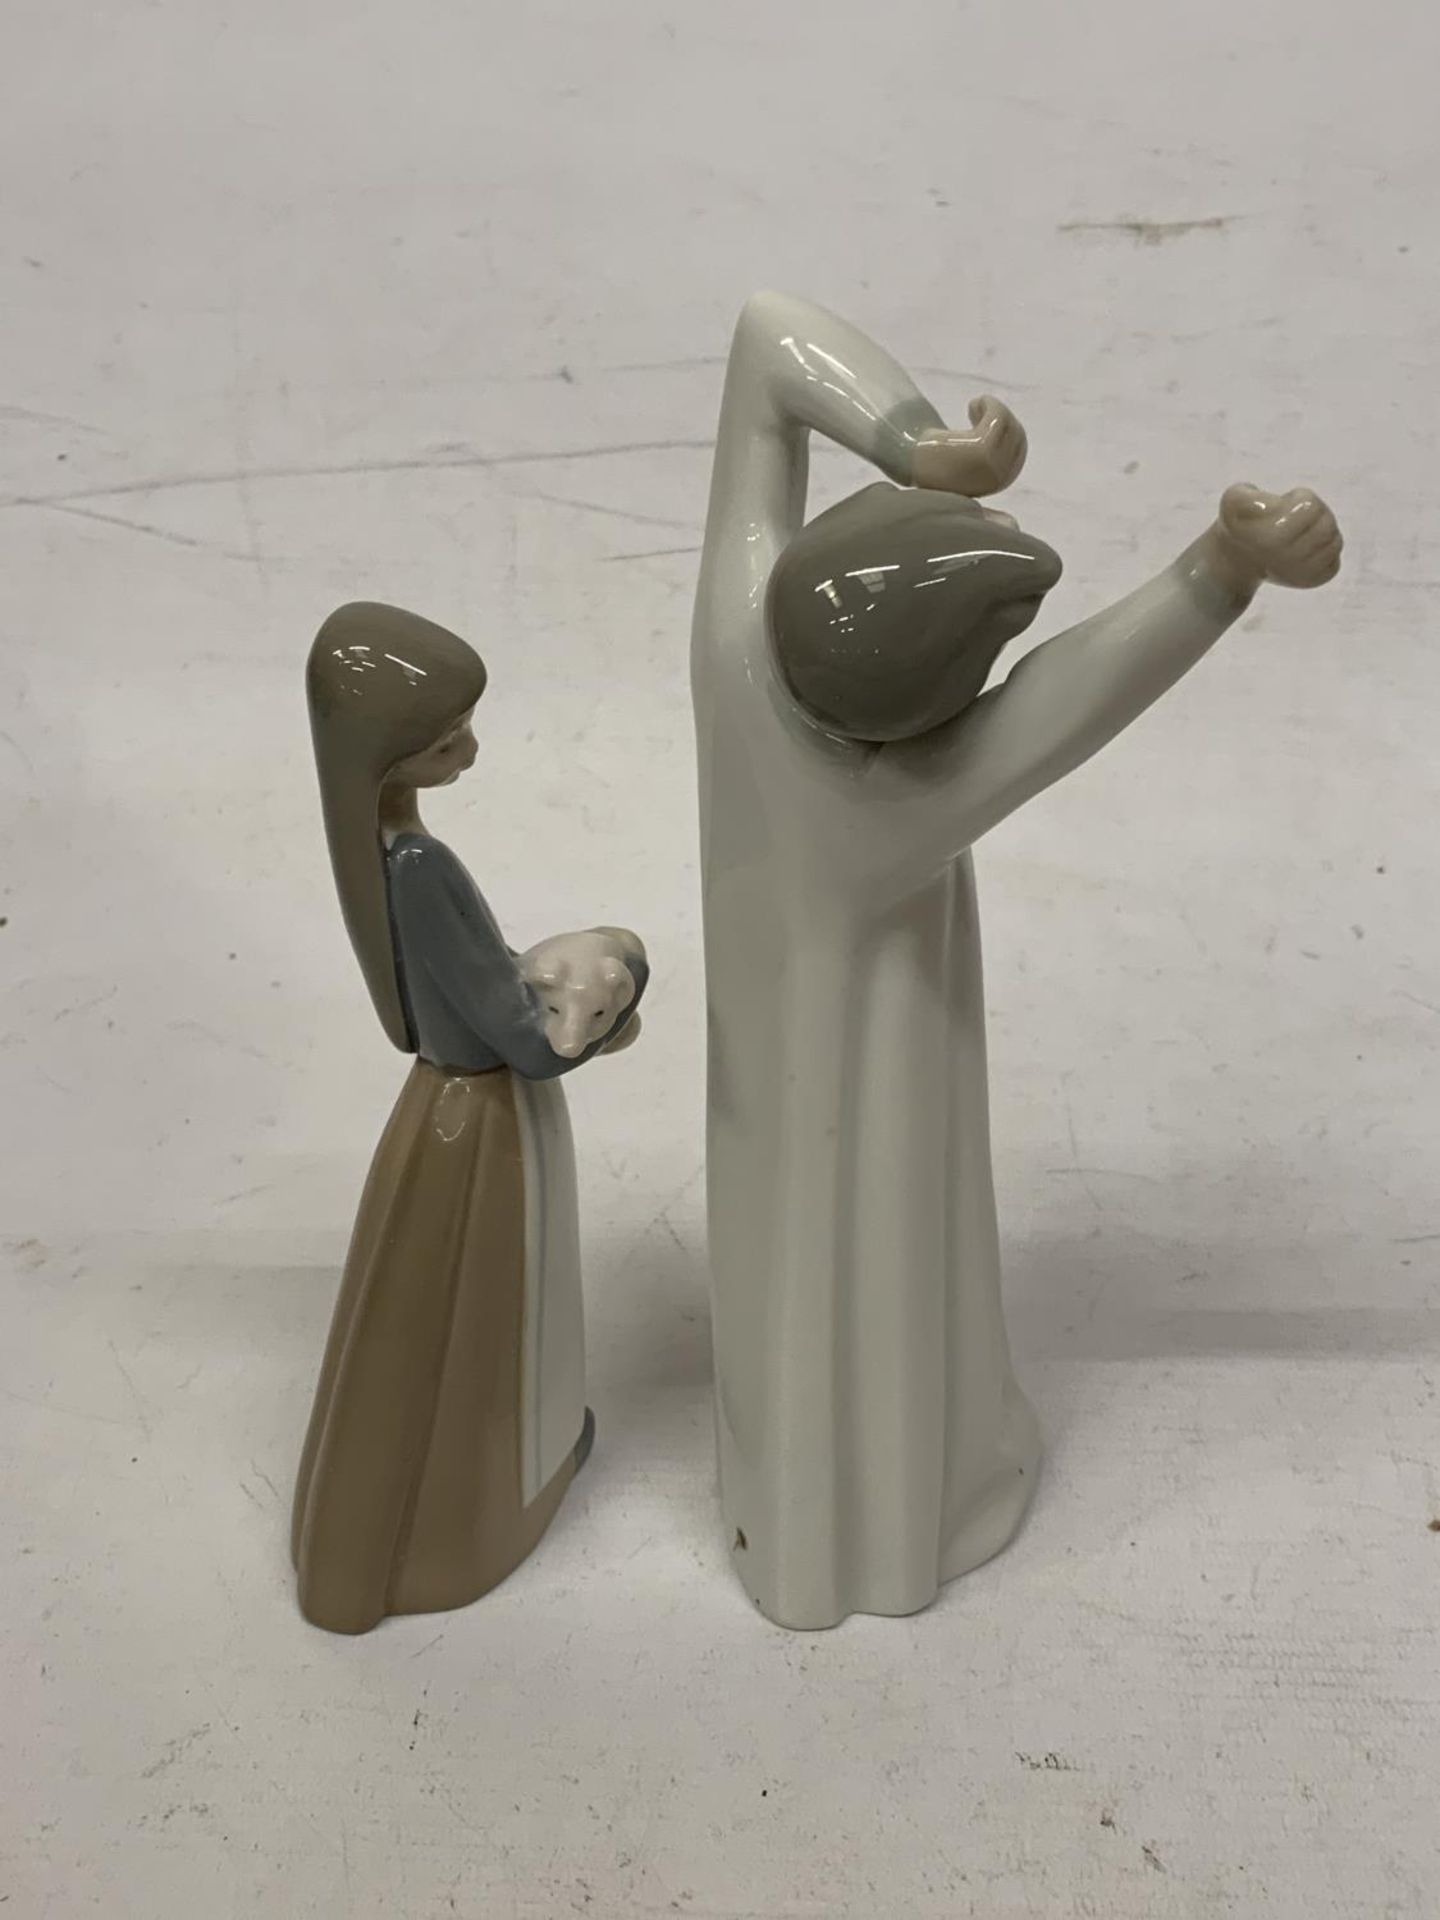 TWO LLADRO FIGURES - BOY YAWNING IN A NIGHTGOWN AND A GIRL HOLDING A PIG - Image 2 of 3